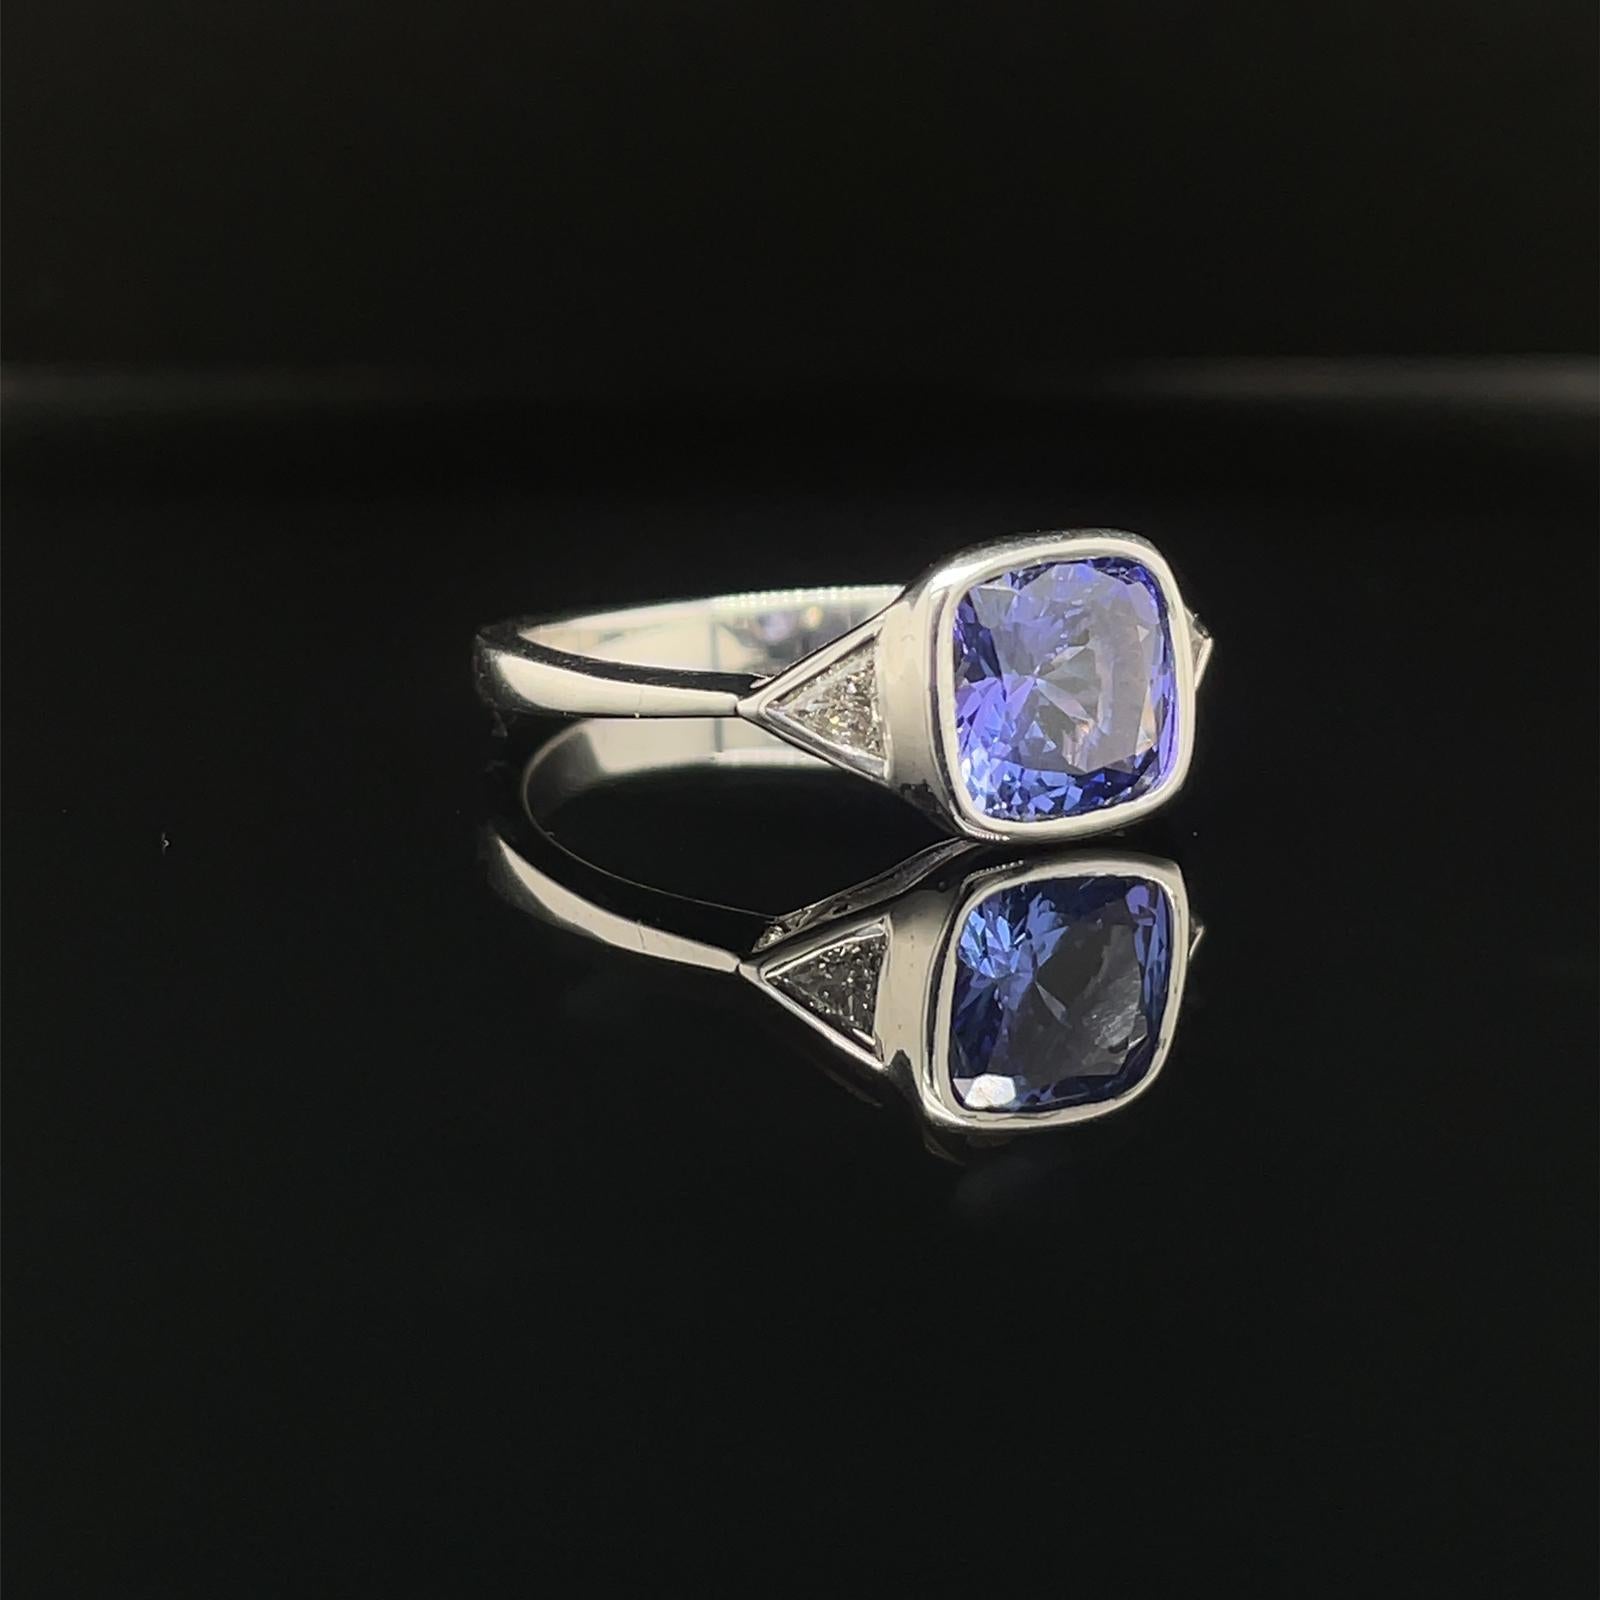 A tanzanite and diamond three stone engagement ring in 18 karat white gold.

This classic and contemporary ring is set to its centre with a distinctive lively blueish purple cushion cut tanzanite of 1.46 carats, mounted into a polished rubover